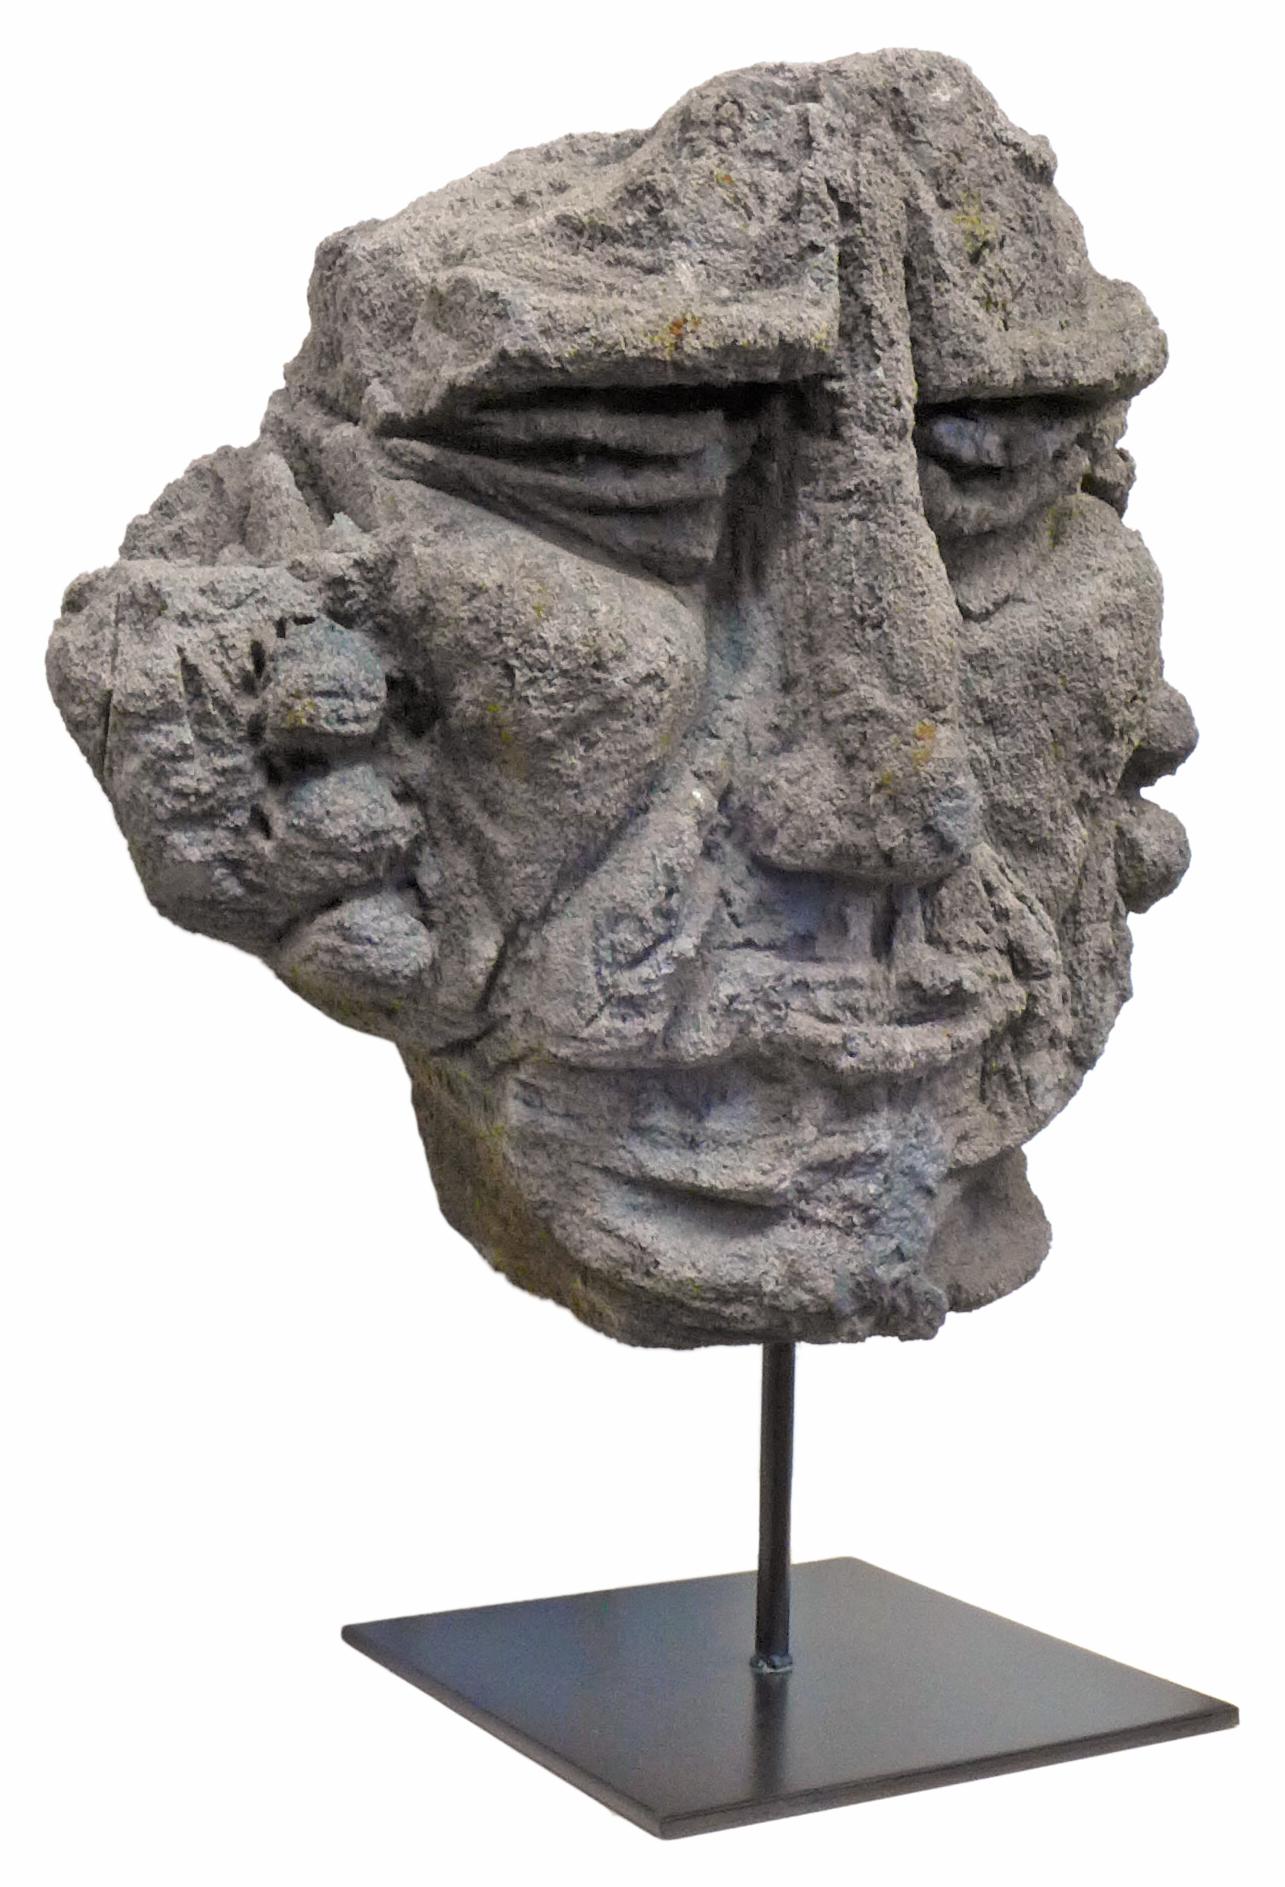 An incredible, mounted, carved lava stone face sculpture. Origin unknown, though likely Polynesian, a wonderful, primitively carved piece with deep, exaggerated features. Seemingly part of a larger work, possibly a bas relief. Set on a contemporary,